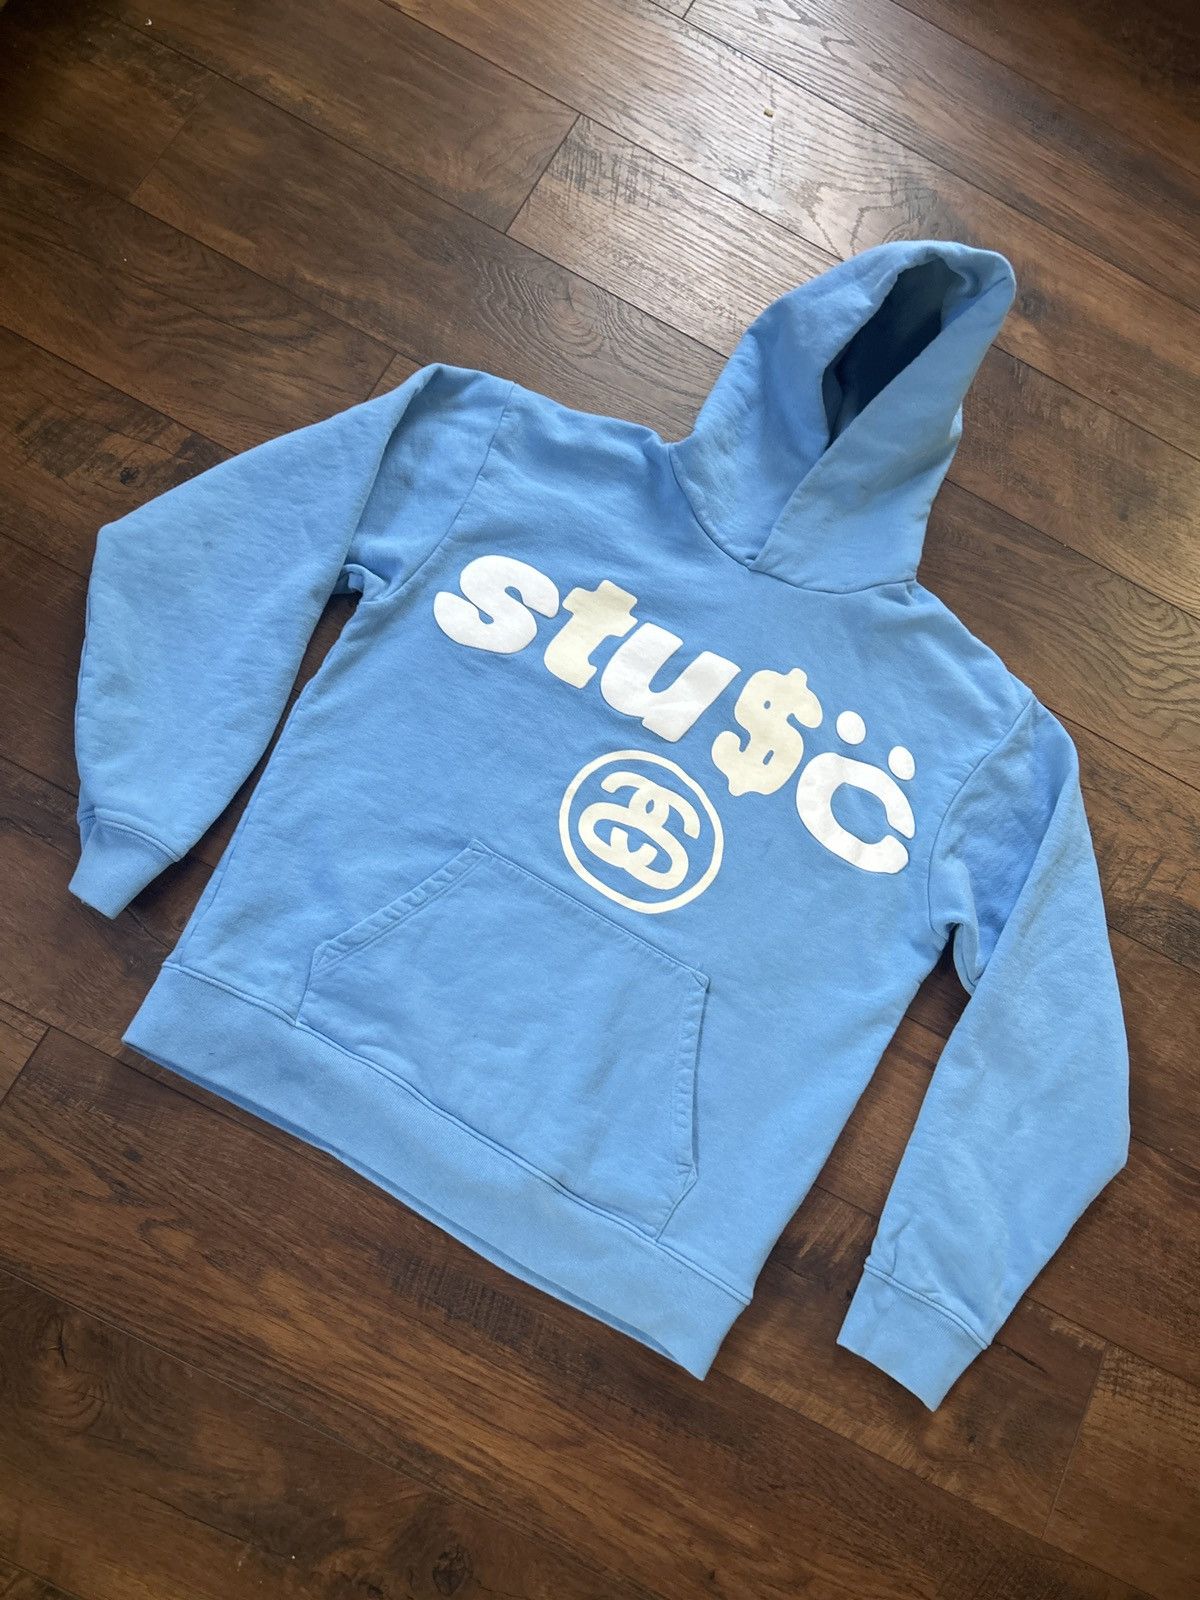 Stussy Stussy X CPFM 8 Ball Pigment Dyed Hoodie | Grailed